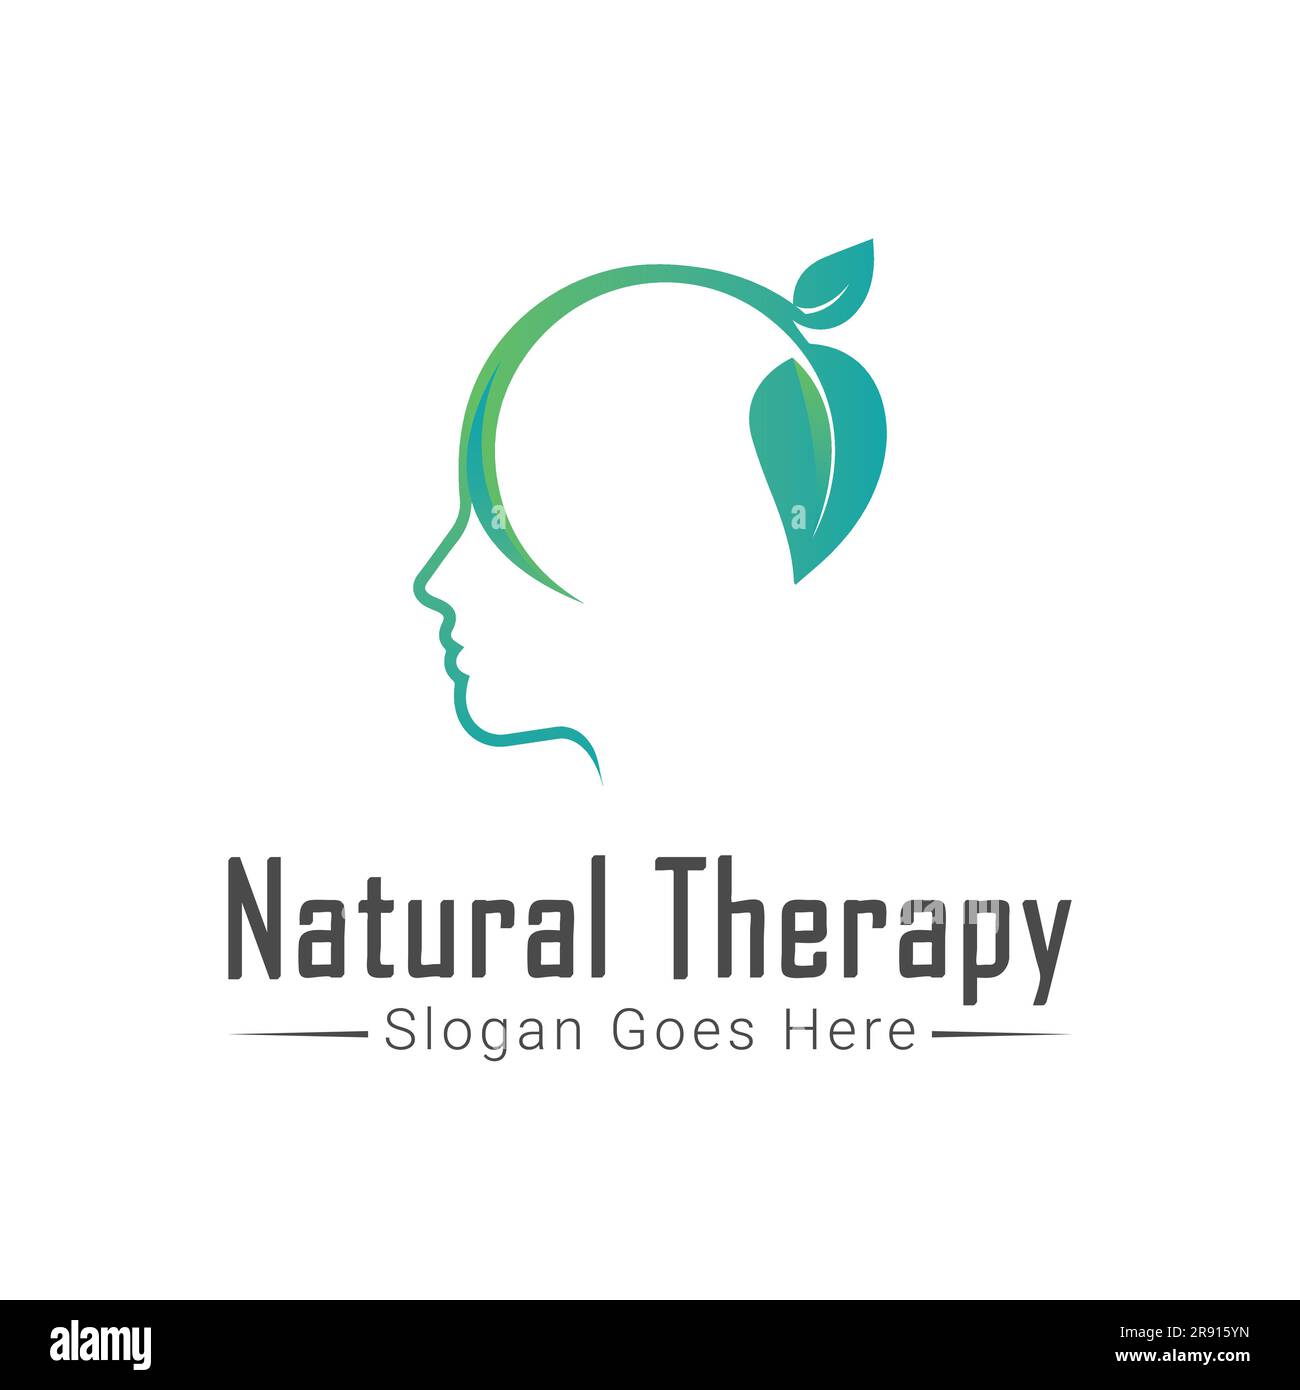 Natural Therapy Logo Design Psychotherapie Logotyp Wellness Entspannung Stock Vektor